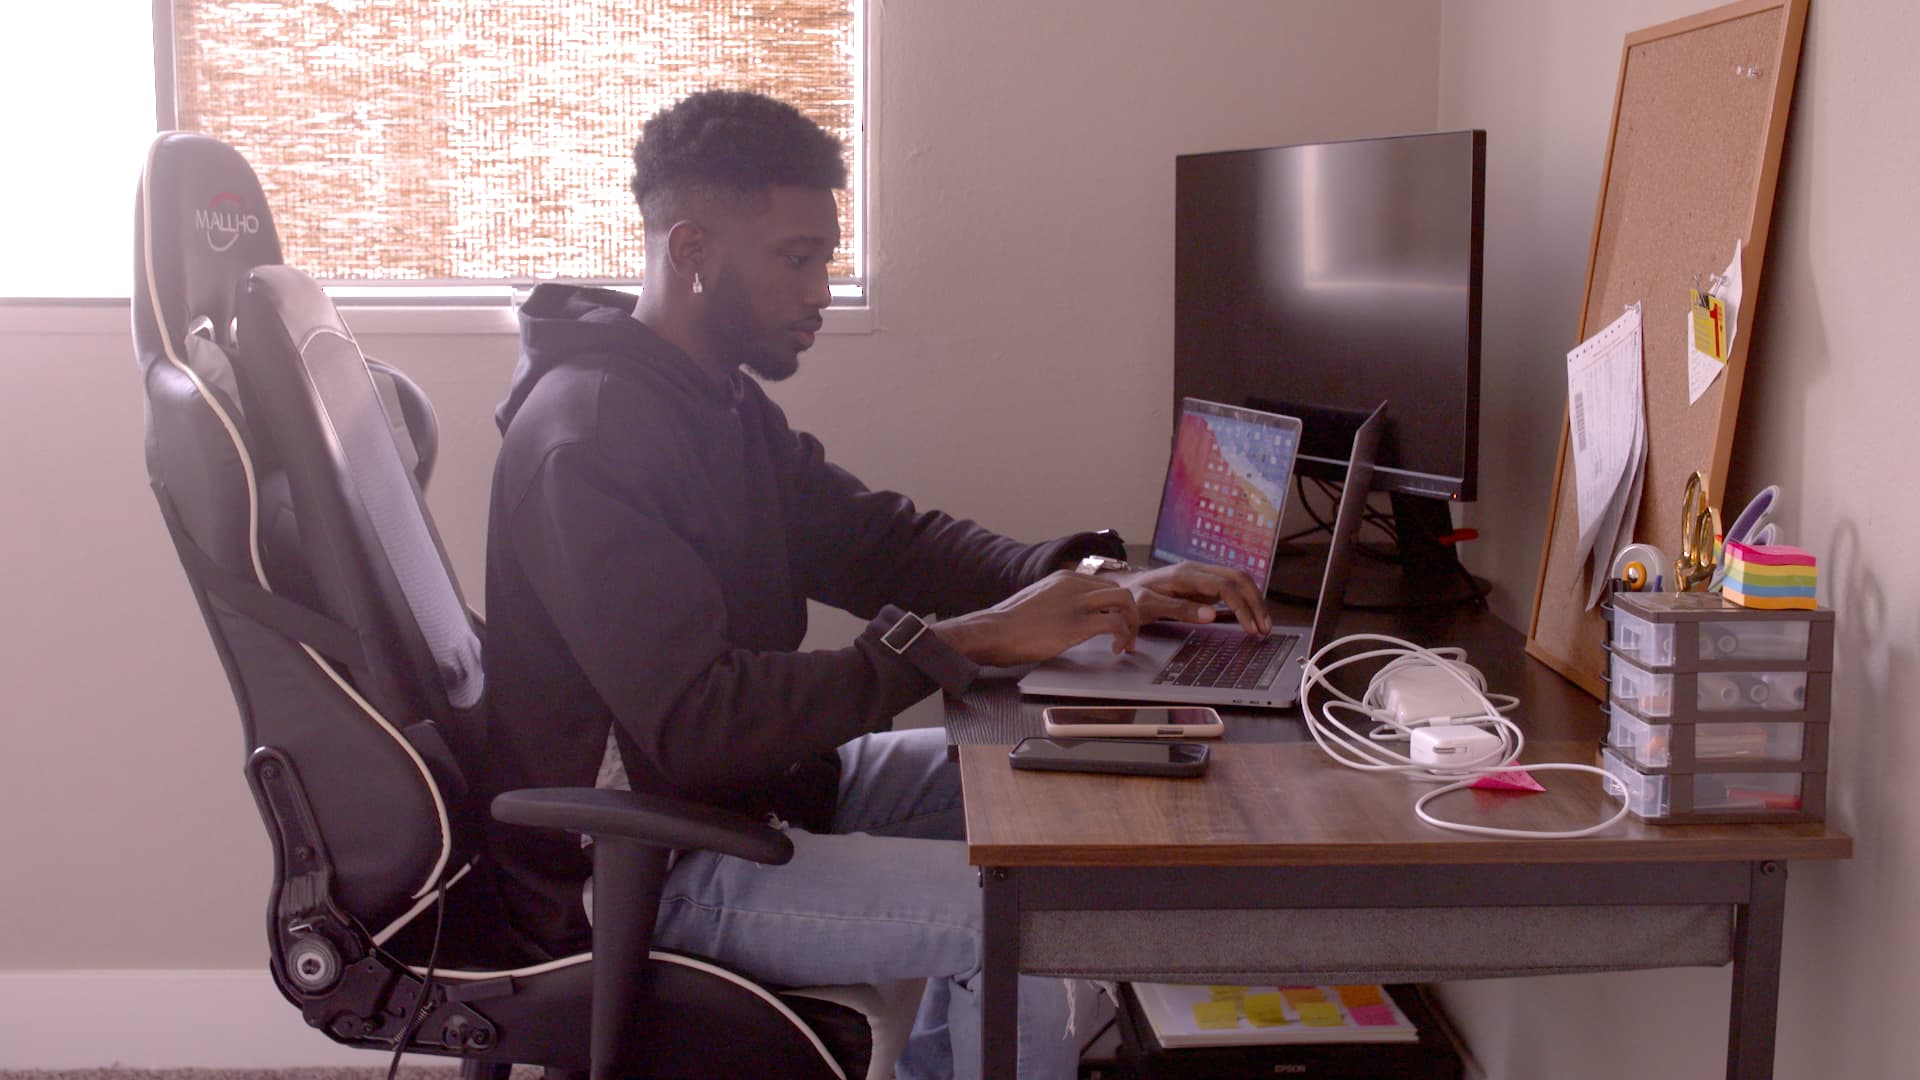 Terzel Ron working from home in Los Angeles. He is an associate producer for a large television network.